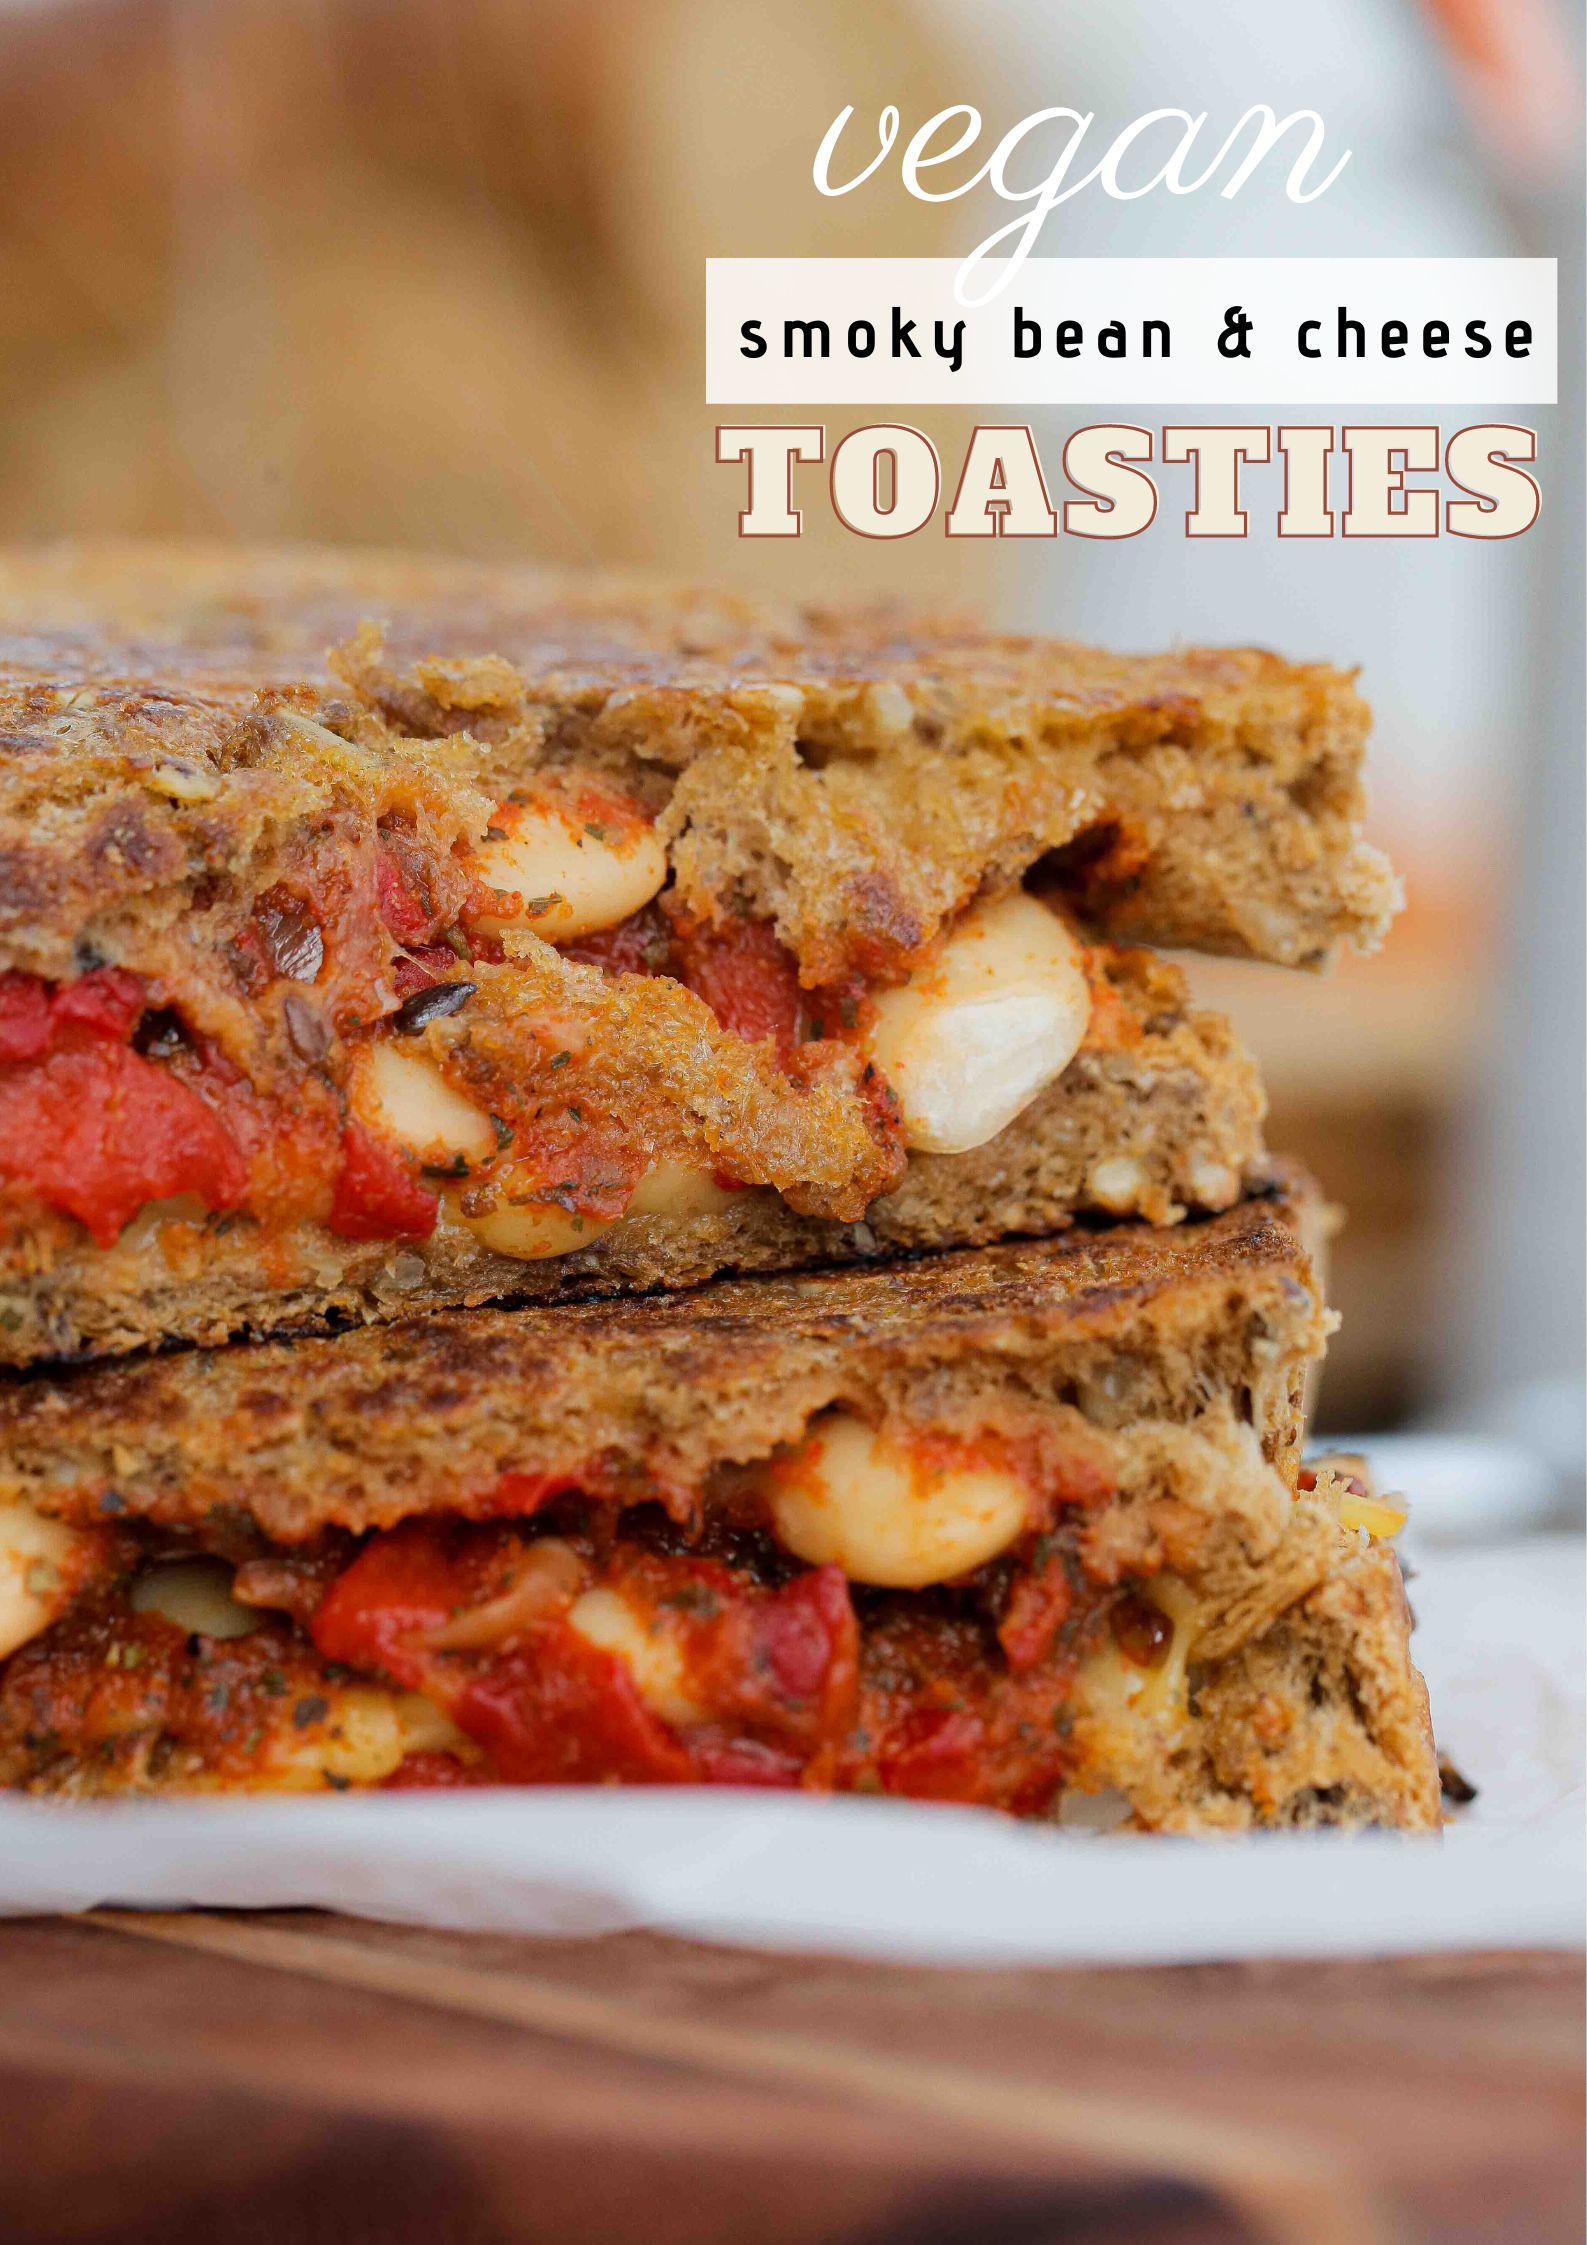 Tangy beans and vegan smoked applewood are packed in making these humble cheese toasties the ultimate comfort food! | Recipe on thecookandhim.com #cheesetoasties #vegancheese #vegansandwich #grilledcheese